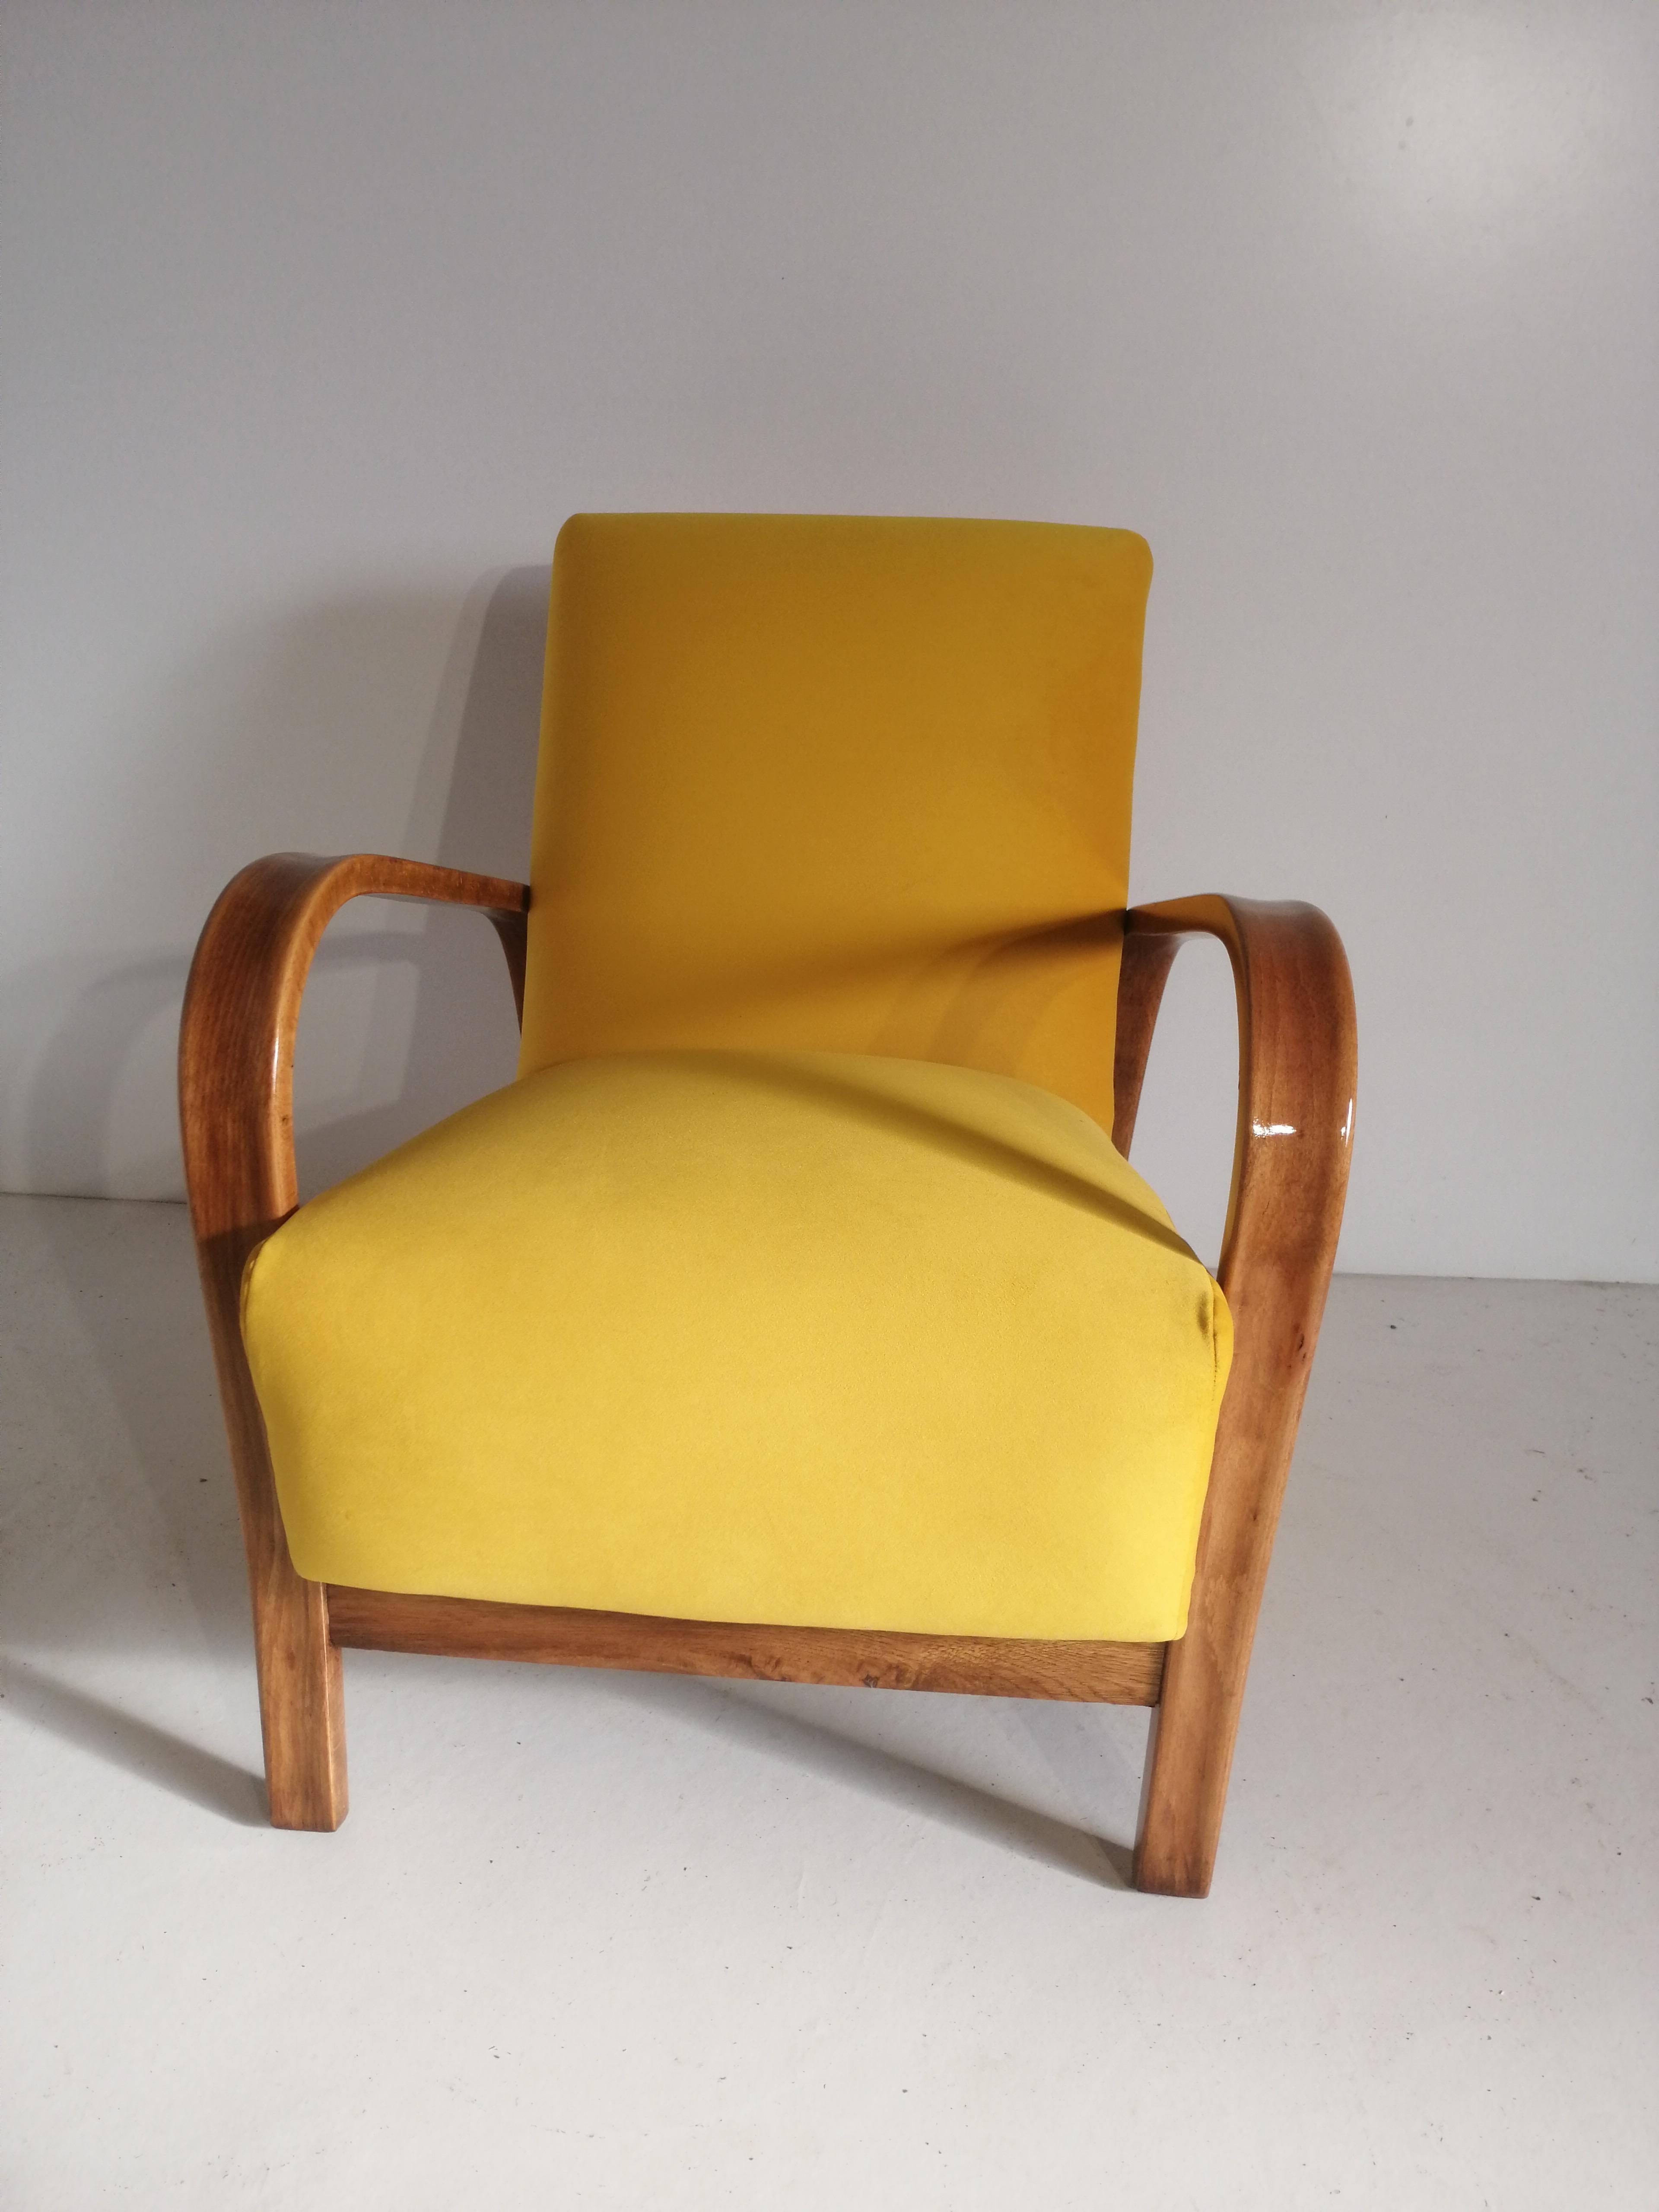 Art Deco armchair from 1940 Czech Republic.
Design and manufacture of the armchair J.Halabala HF-11.
We send furniture to every corner of the world.


 